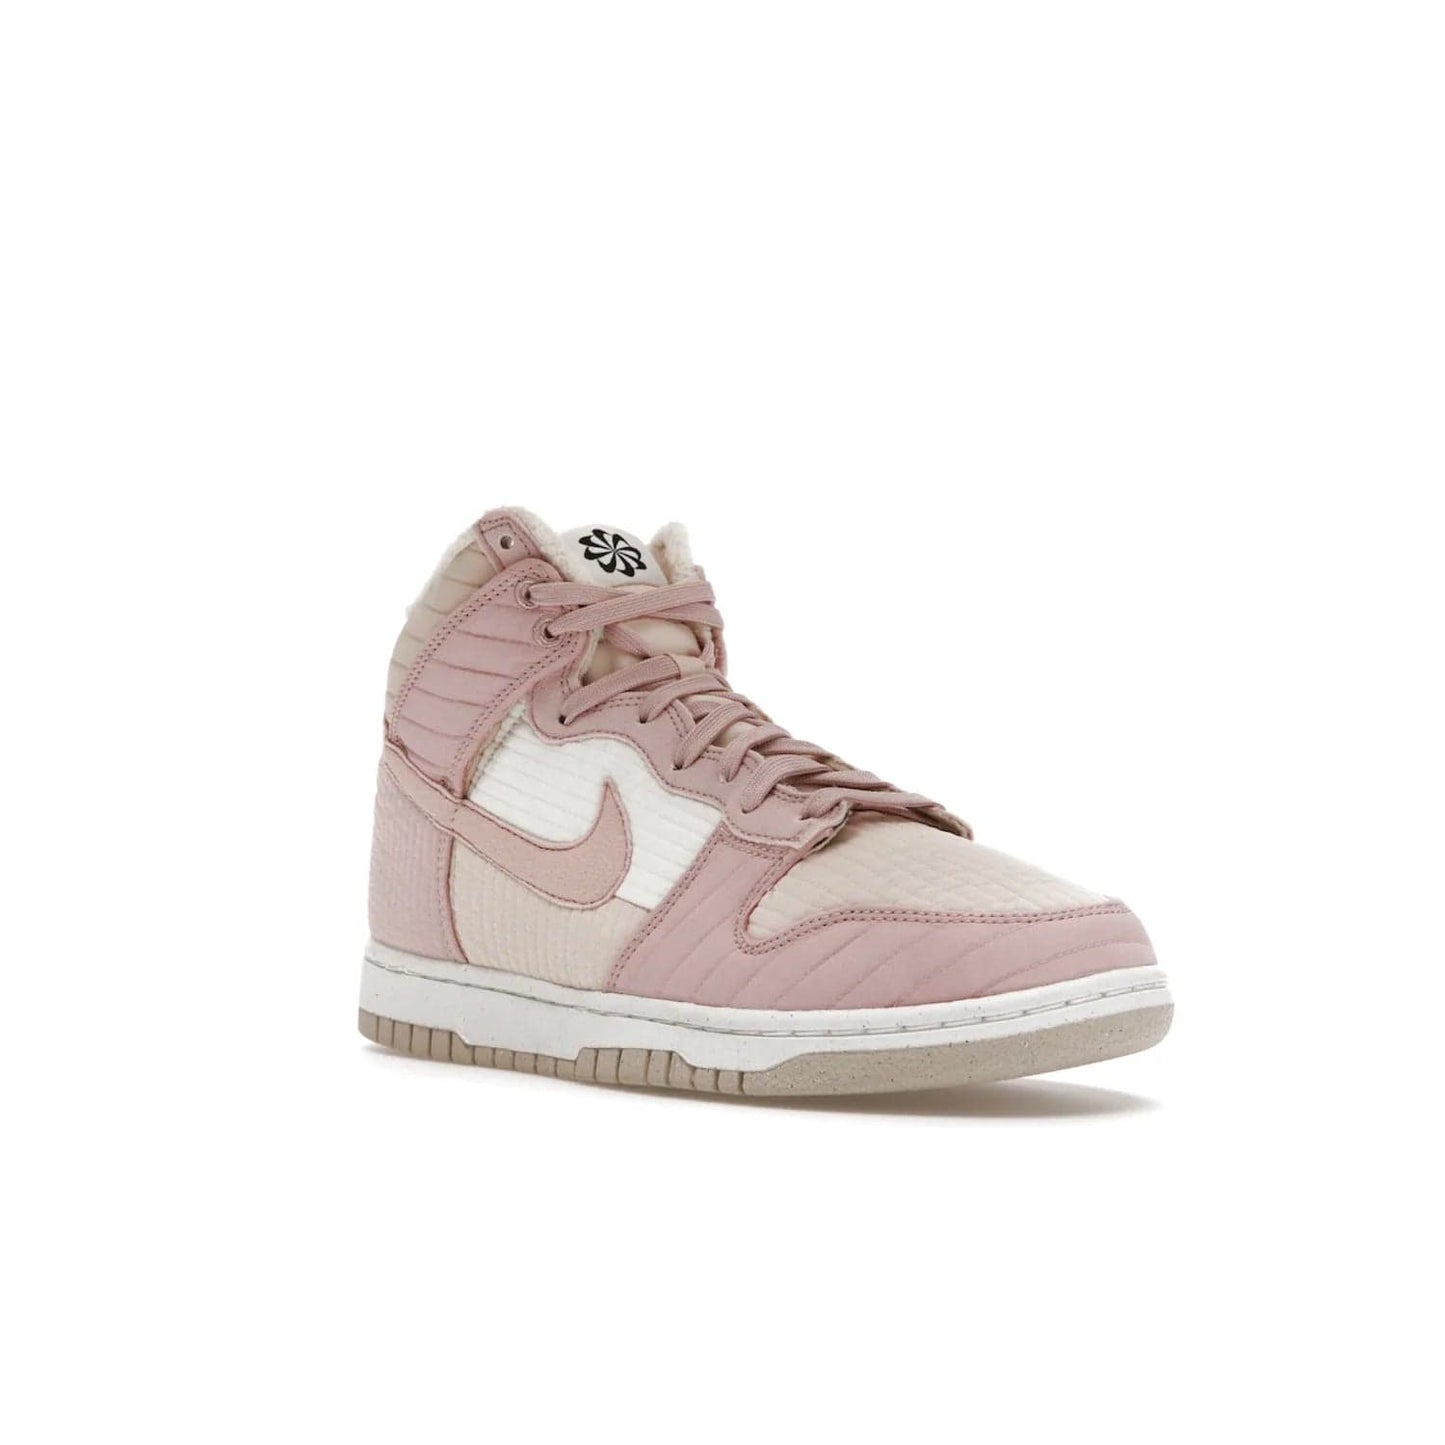 Nike Dunk High LX Next Nature Pink Oxford (Women's) - Image 6 - Only at www.BallersClubKickz.com - Cozy up in the Nike Dunk High LX Next Nature Pink Oxford for Women. Quilted upper, white midsole, soft fleece interior provide warmth and comfort for cold winter nights.